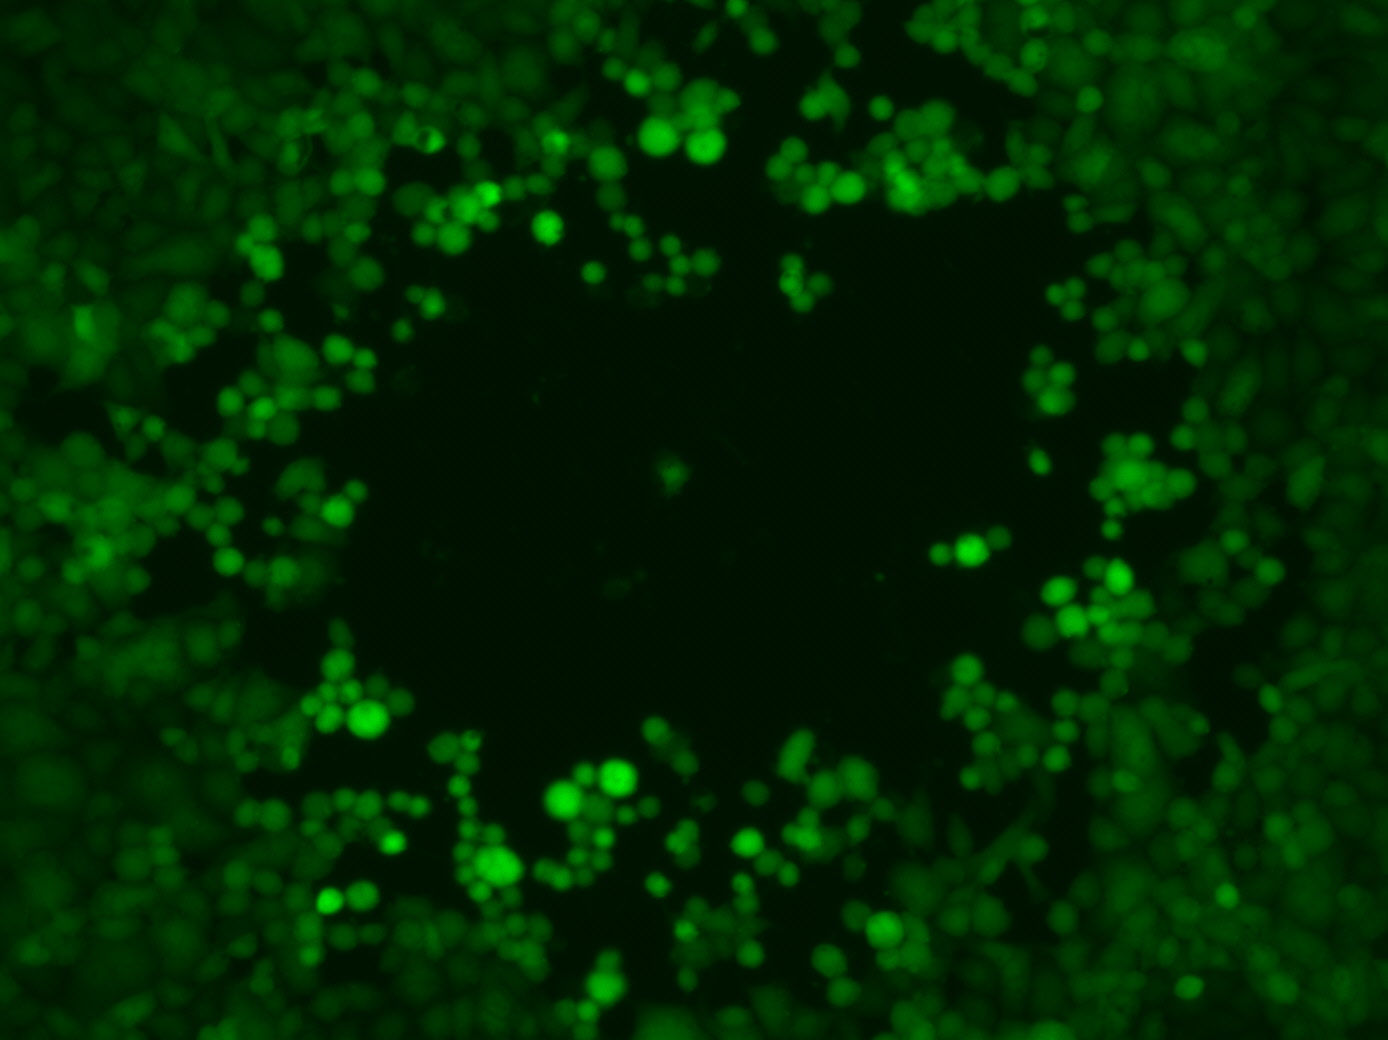 Plaque formation by green fluorescent HSV1 viruses.